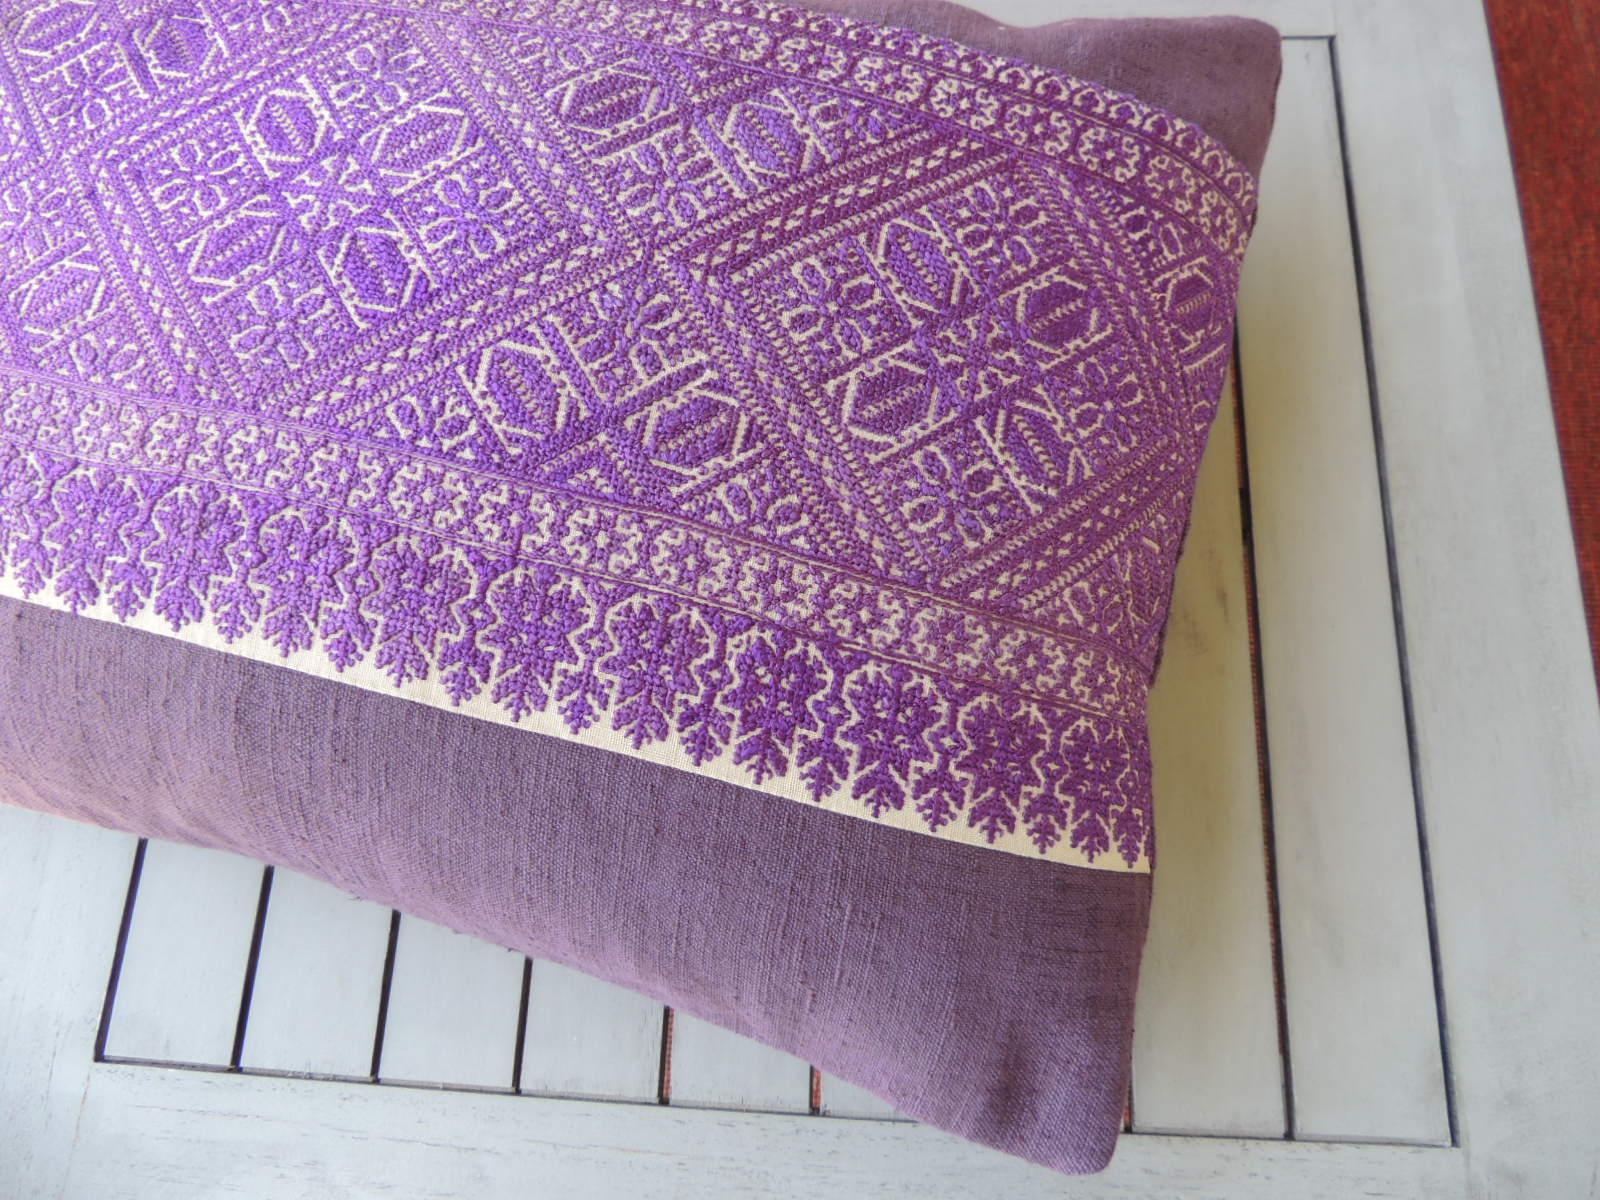 Moorish Antique Purple and White Embroidered Fez Decorative Bolster Pillow